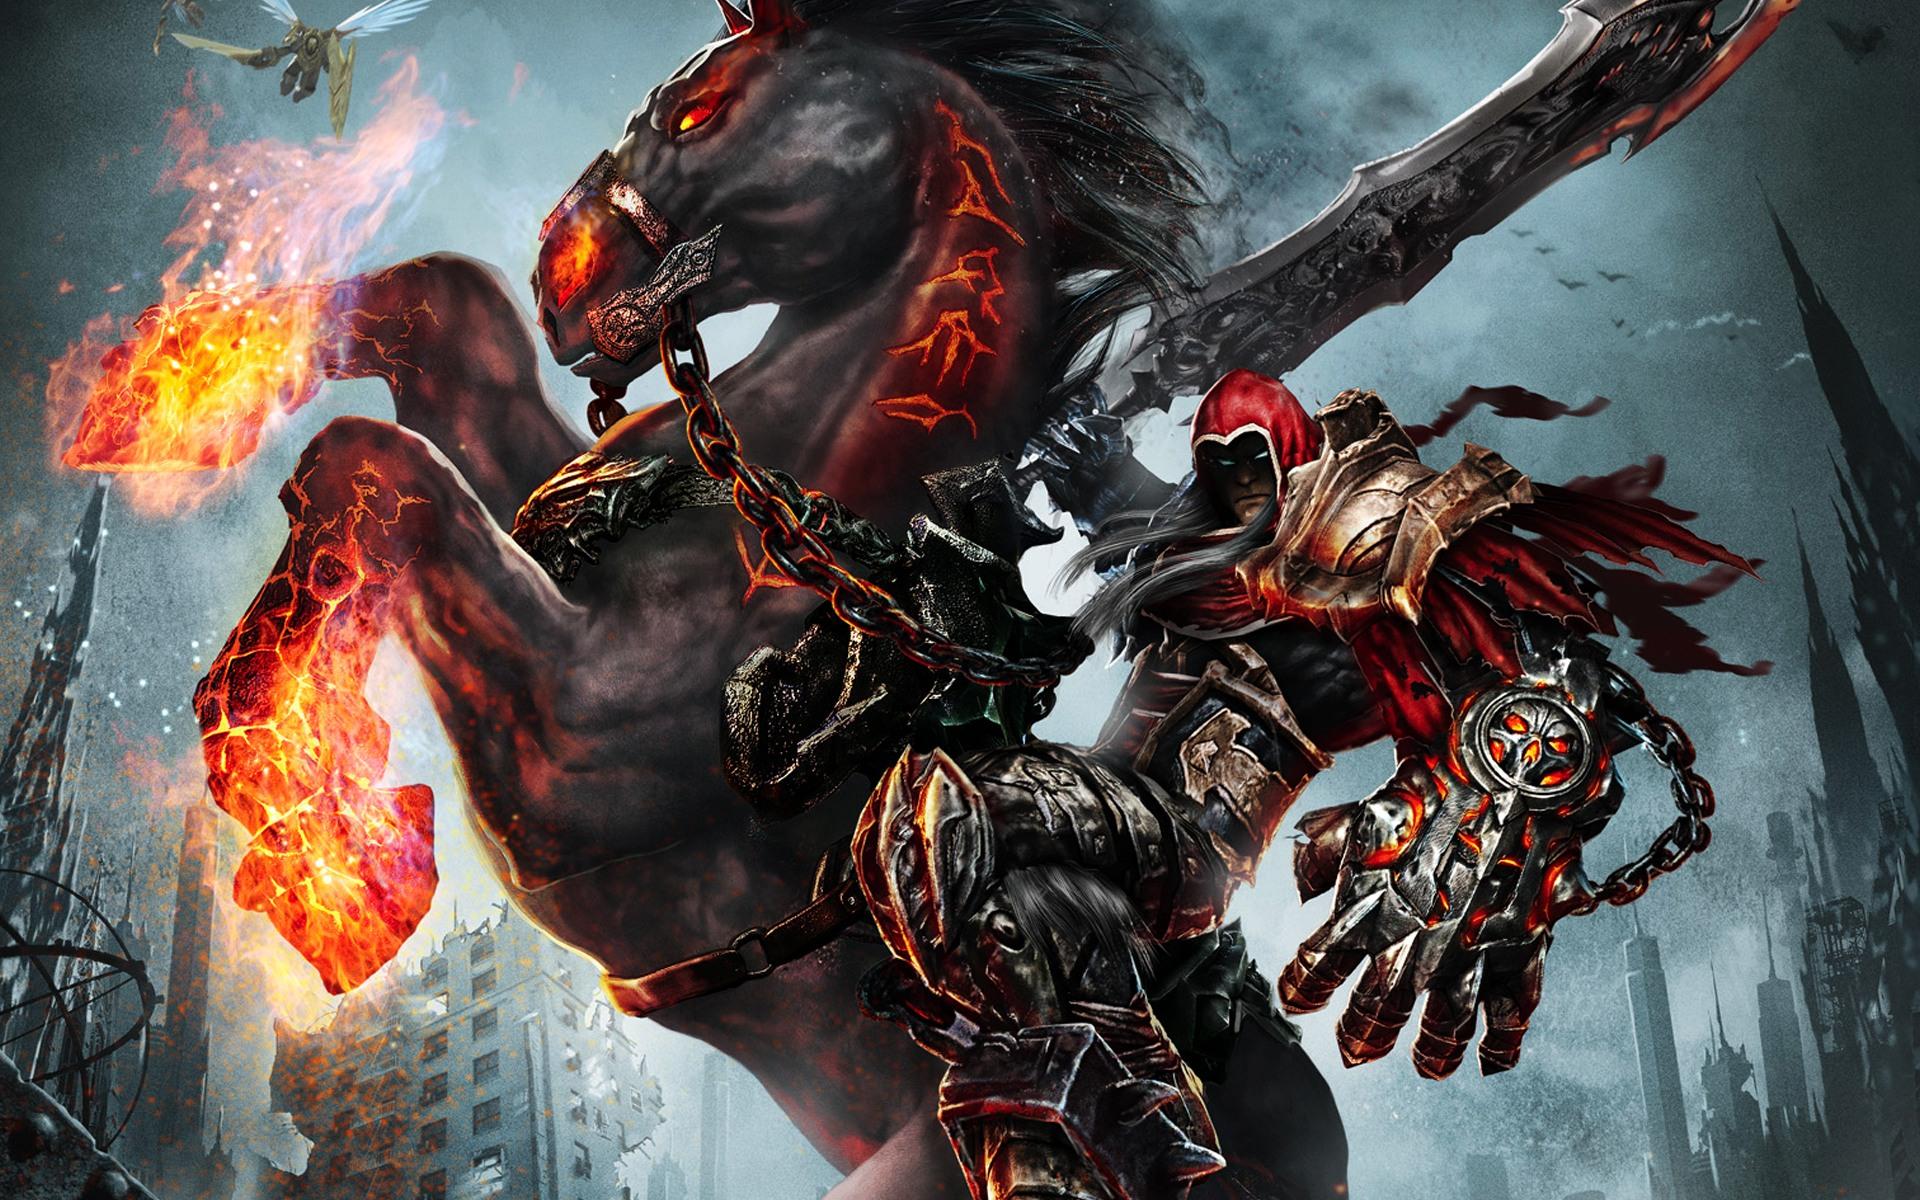 Darksiders: Warmastered Edition (Switch) Review